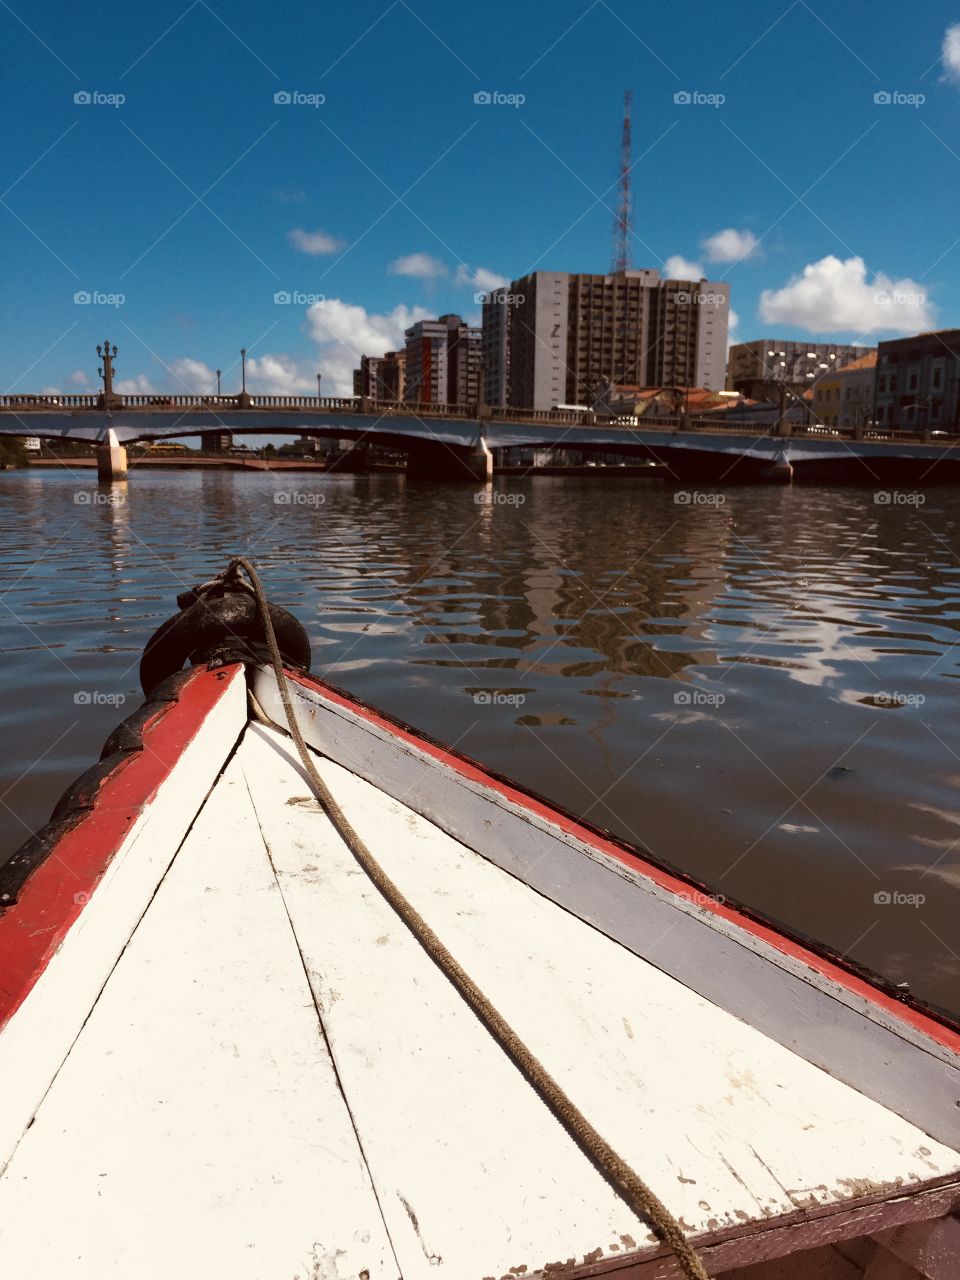 Tour in a boat in Recife, Pernambuco, Brasil, also known as the “Brazilian Venice” city. Beautiful landscape with historic buildings and diverse culture.